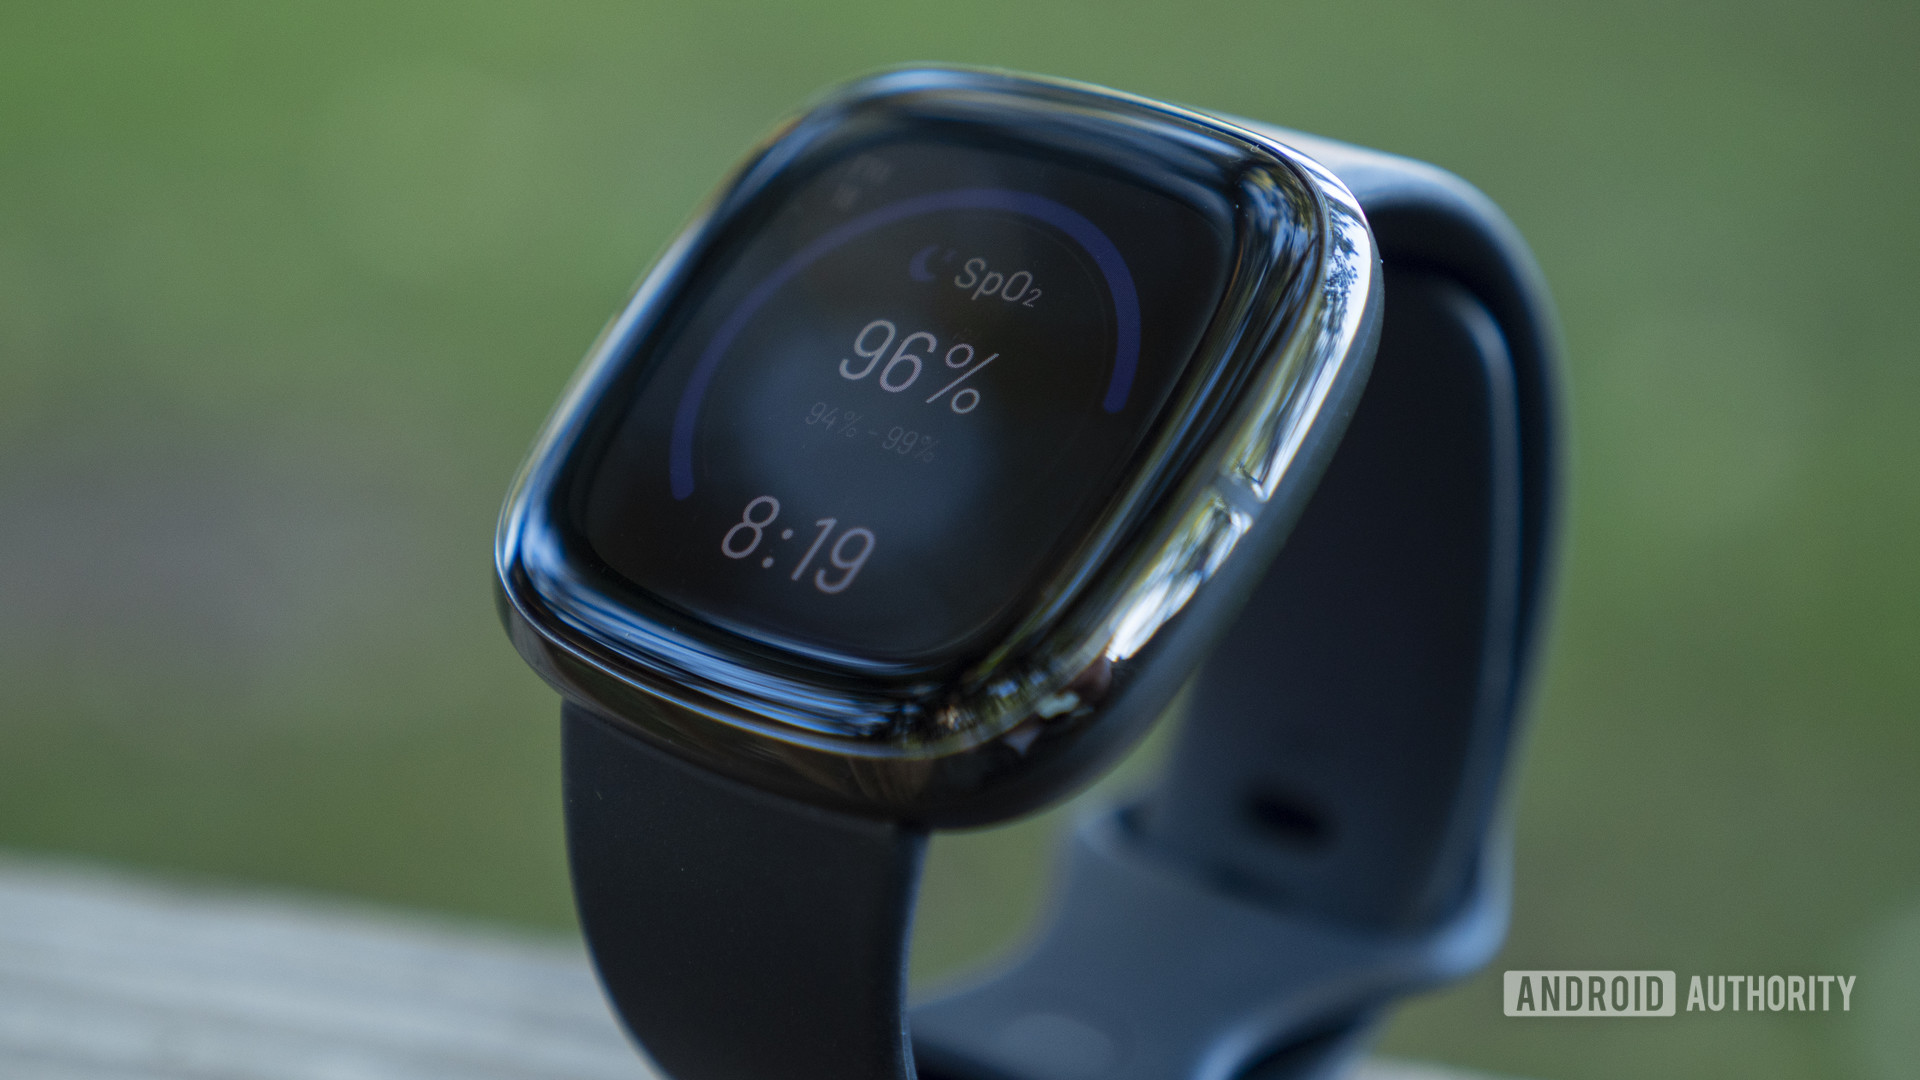 The Fitbit Sense display showing watch face